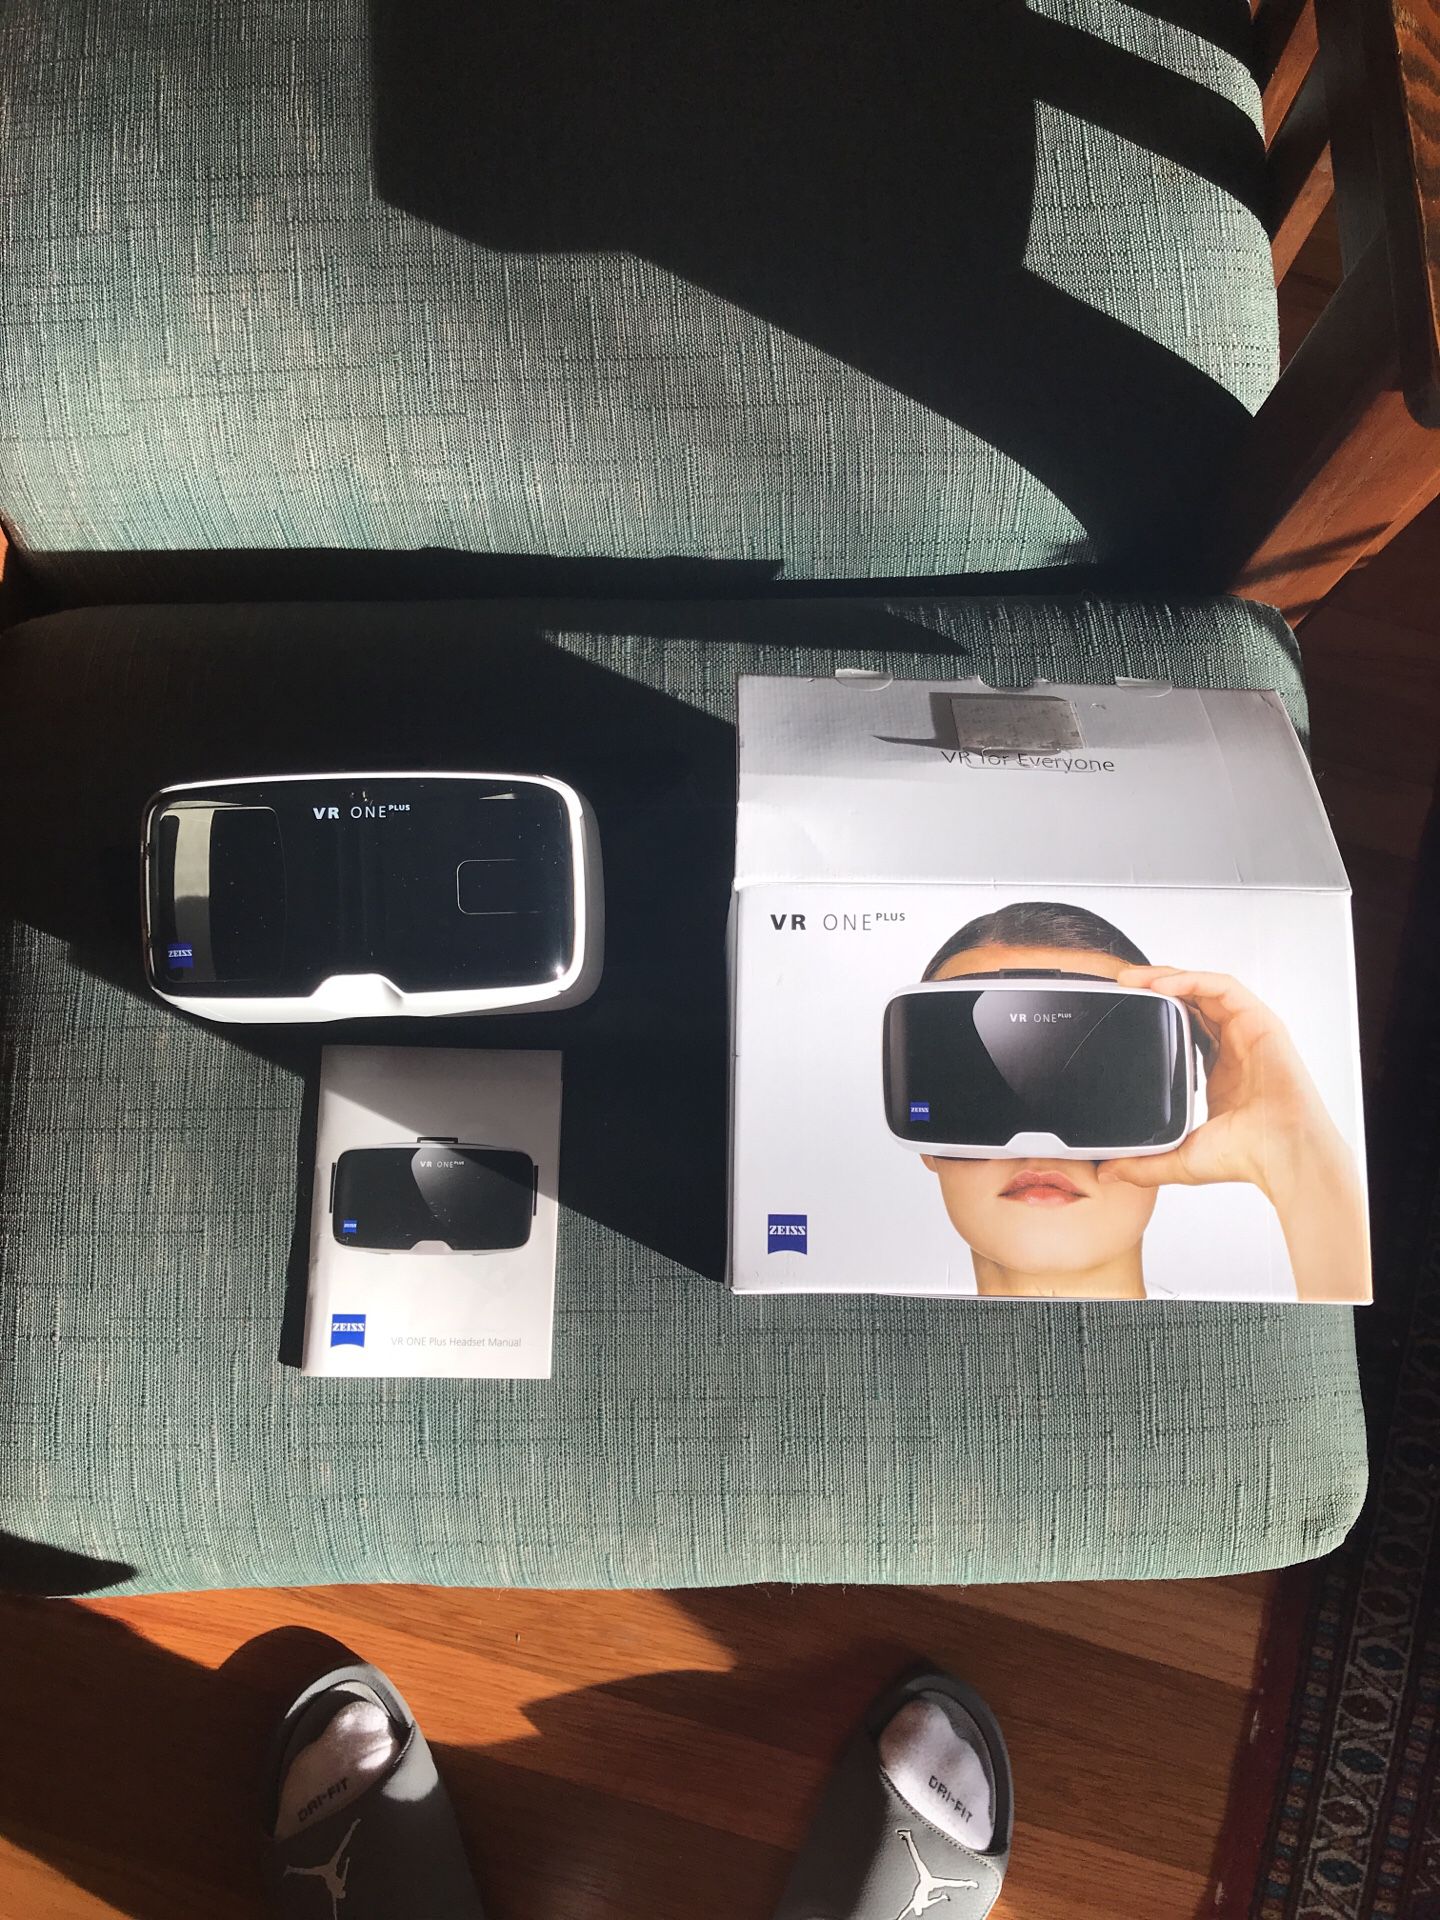 Zeiss vr one plus